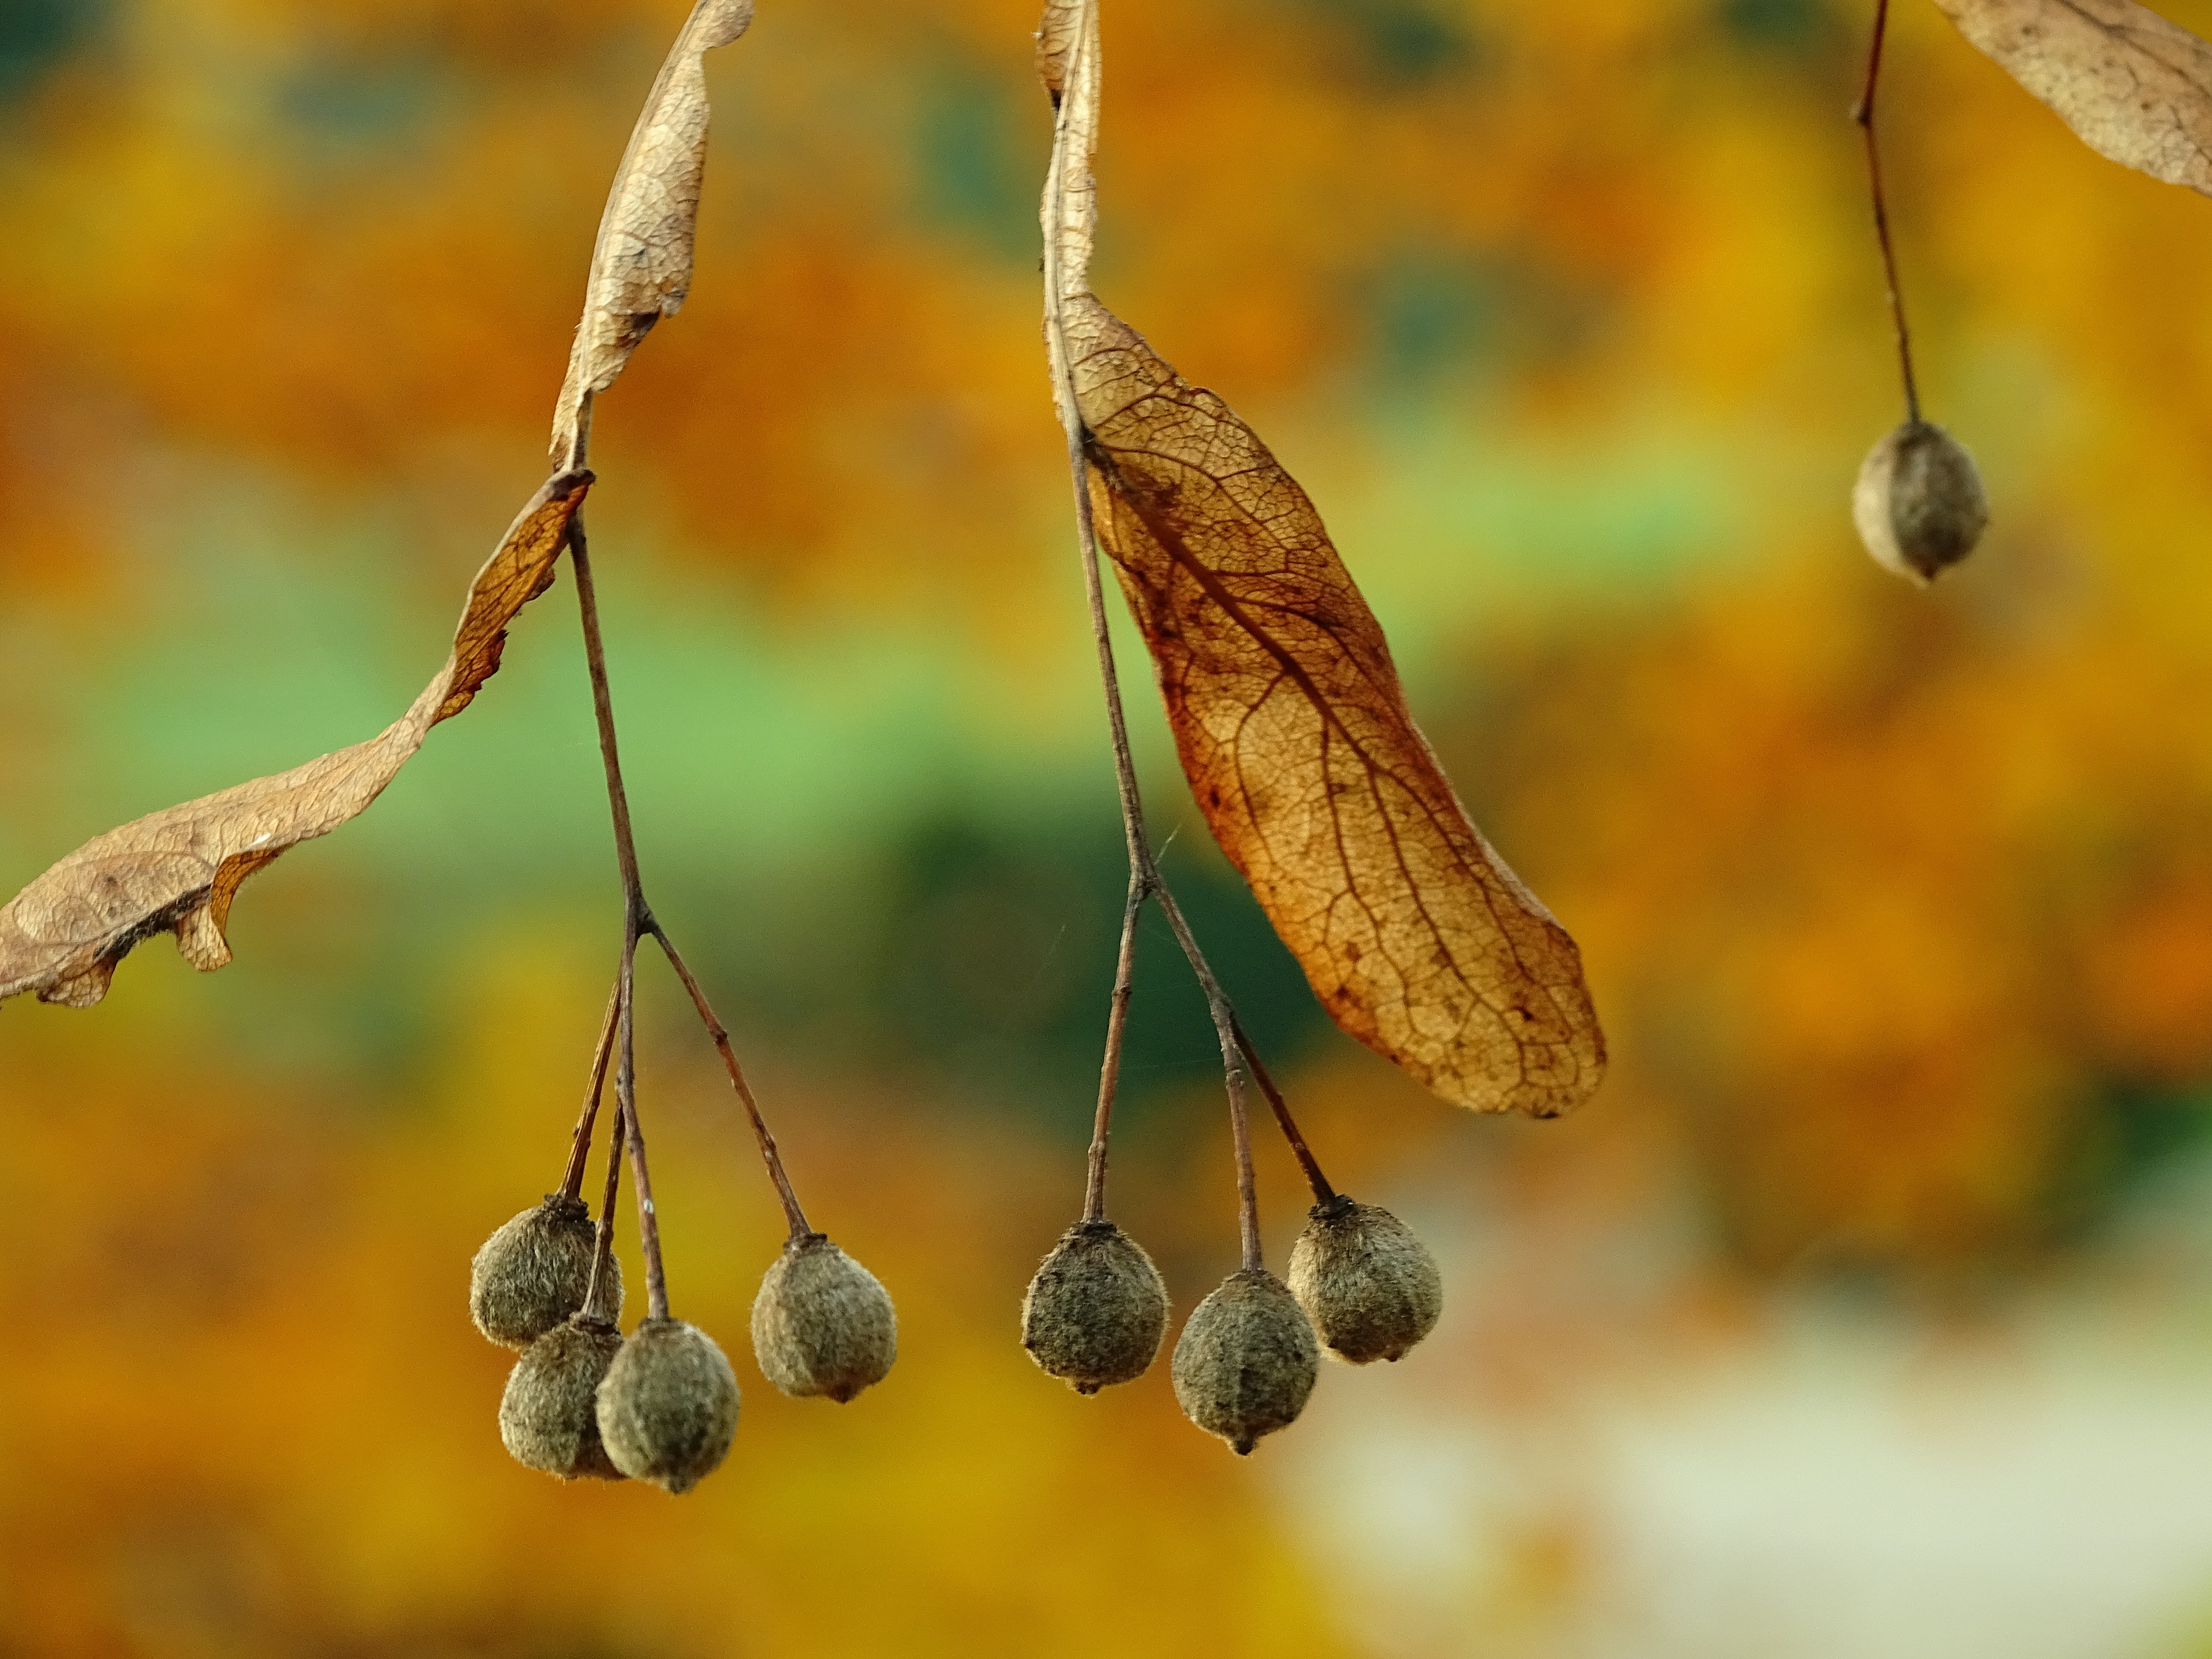 Autumn, Golden, Leaf, Fall Foliage, hanging, focus on foreground